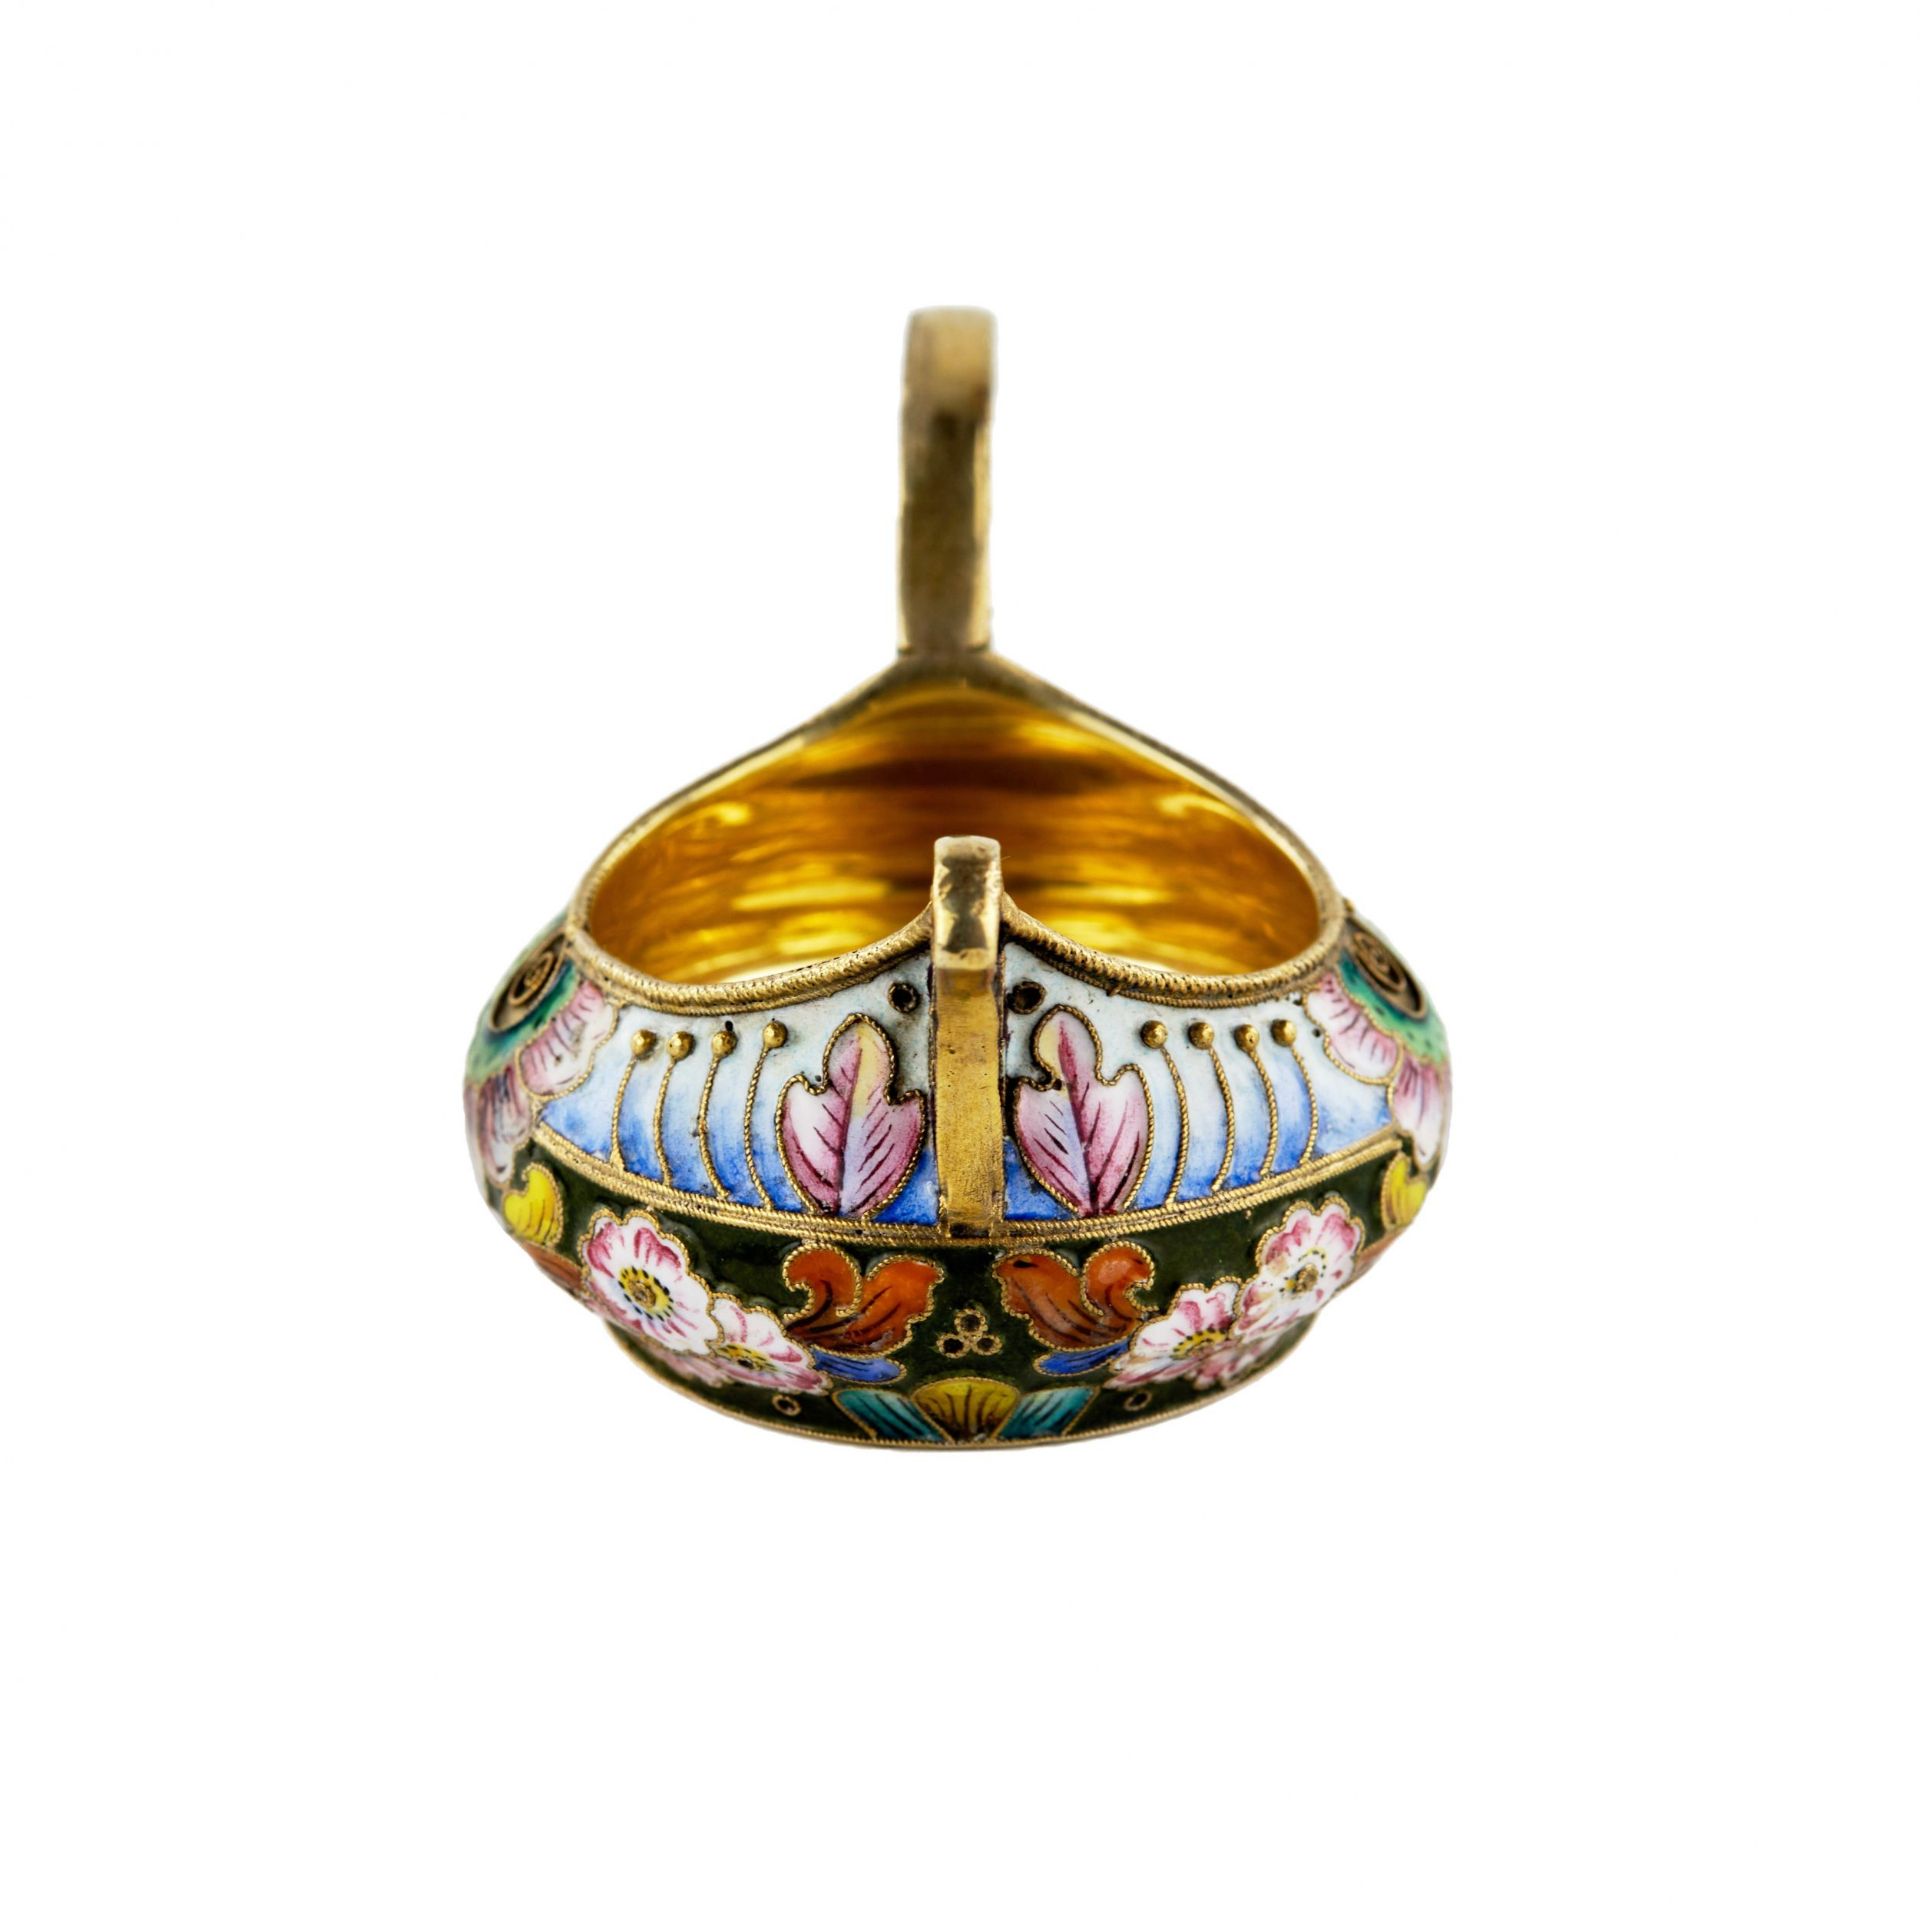 20 Artel. Silver kovsh with painted enamel on filigree. Moscow, 1908-1917 - Image 3 of 7